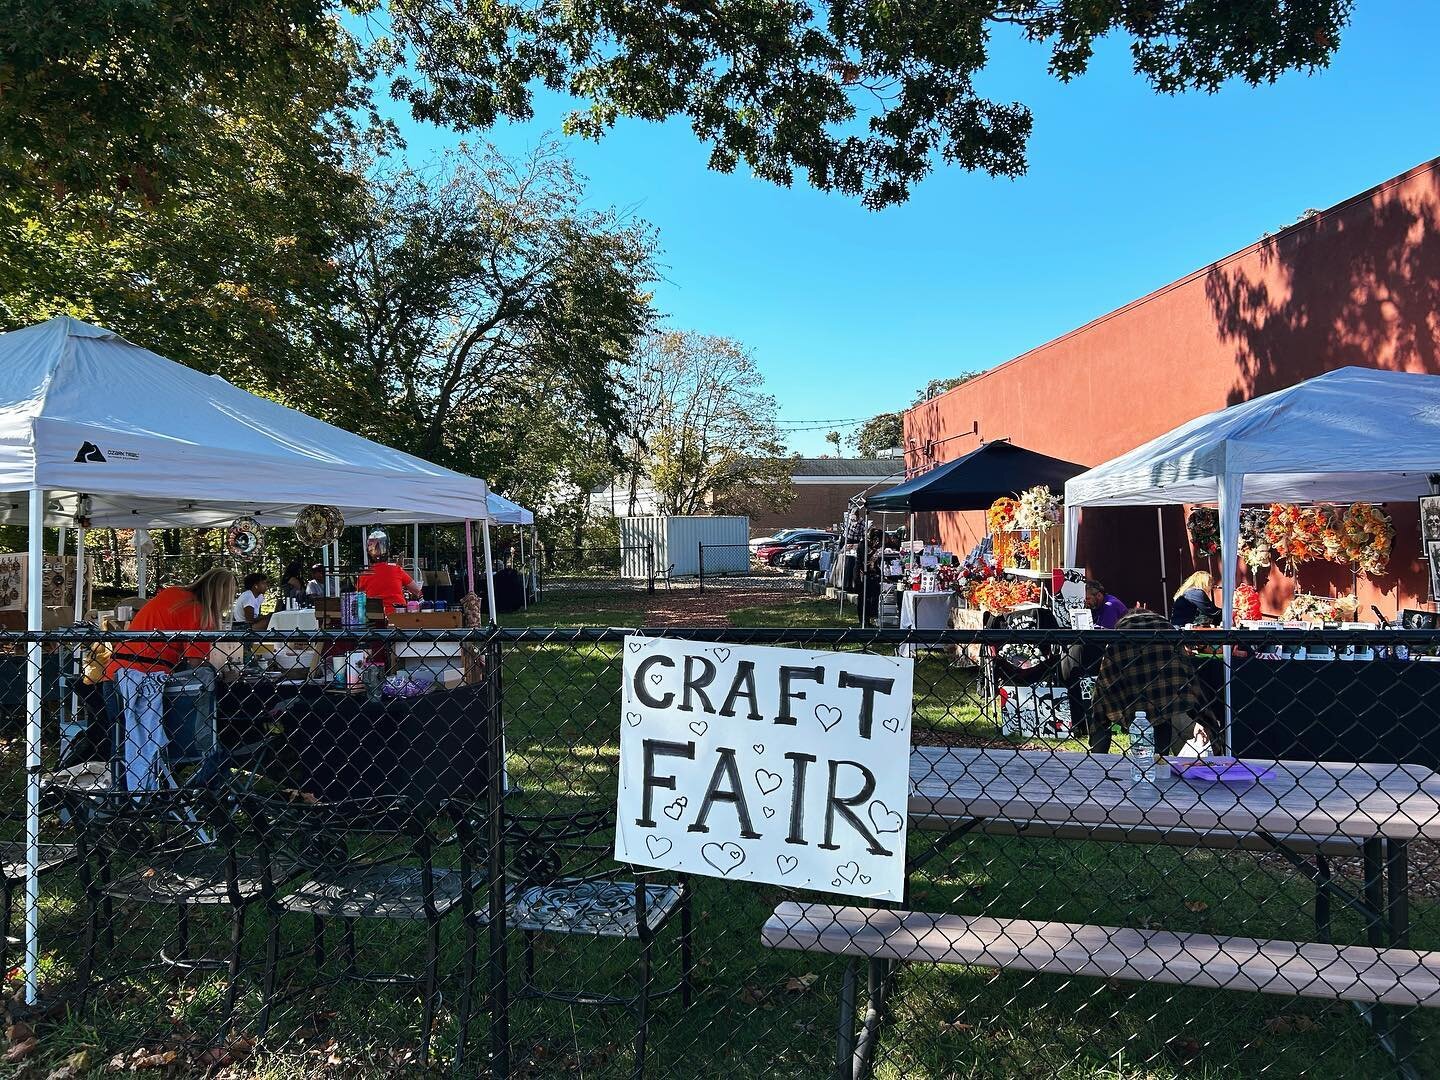 We&rsquo;ve got crafts, costumes and candy! Our craft fair starts at 12 and goes until 7 tonight. From then we&rsquo;ve got music from 7 to 10. The Halloween parade is today and we&rsquo;re loving all the costumes!